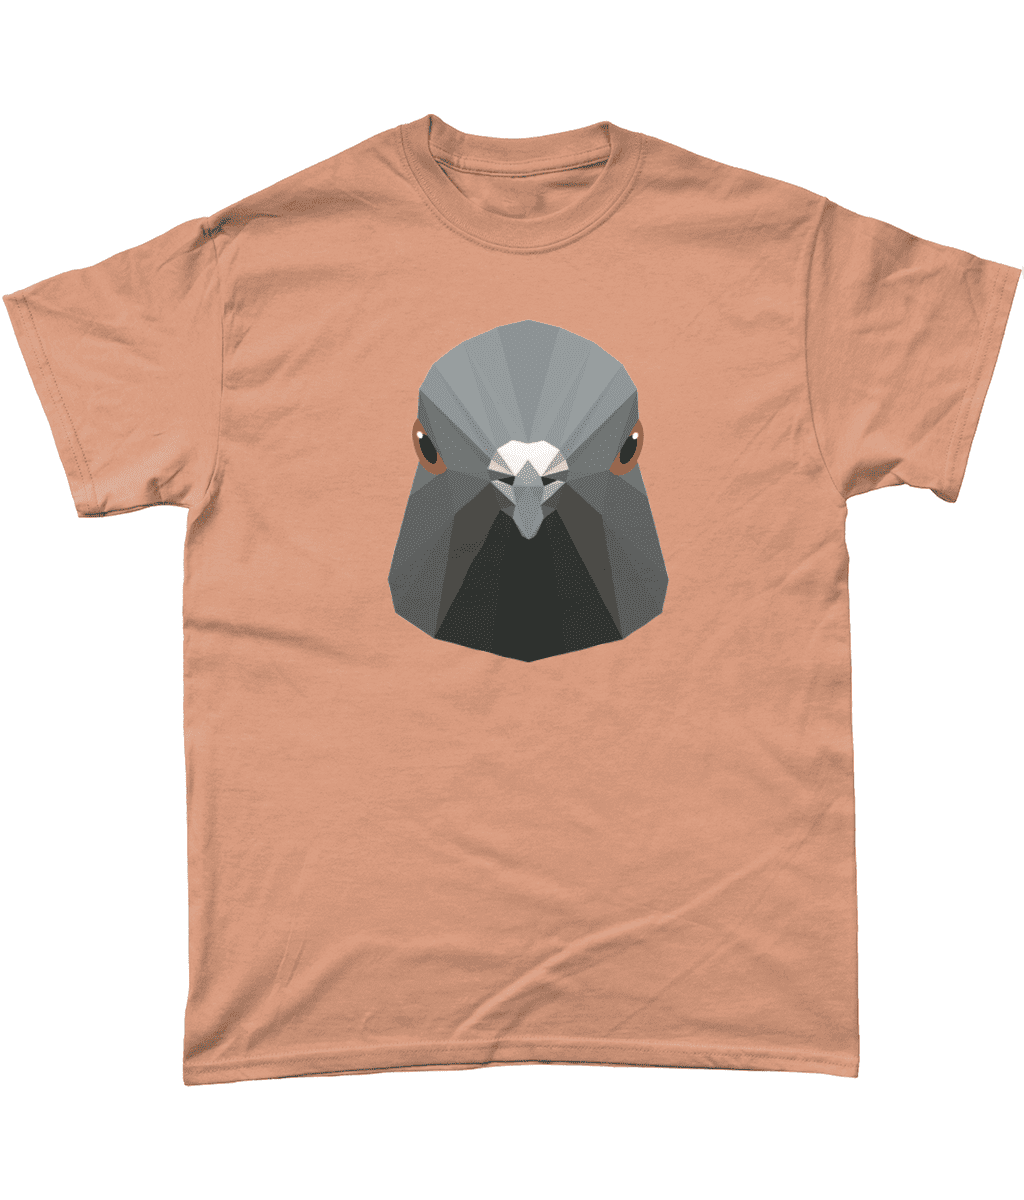 Low Poly Pigeon T Shirt Old Gold